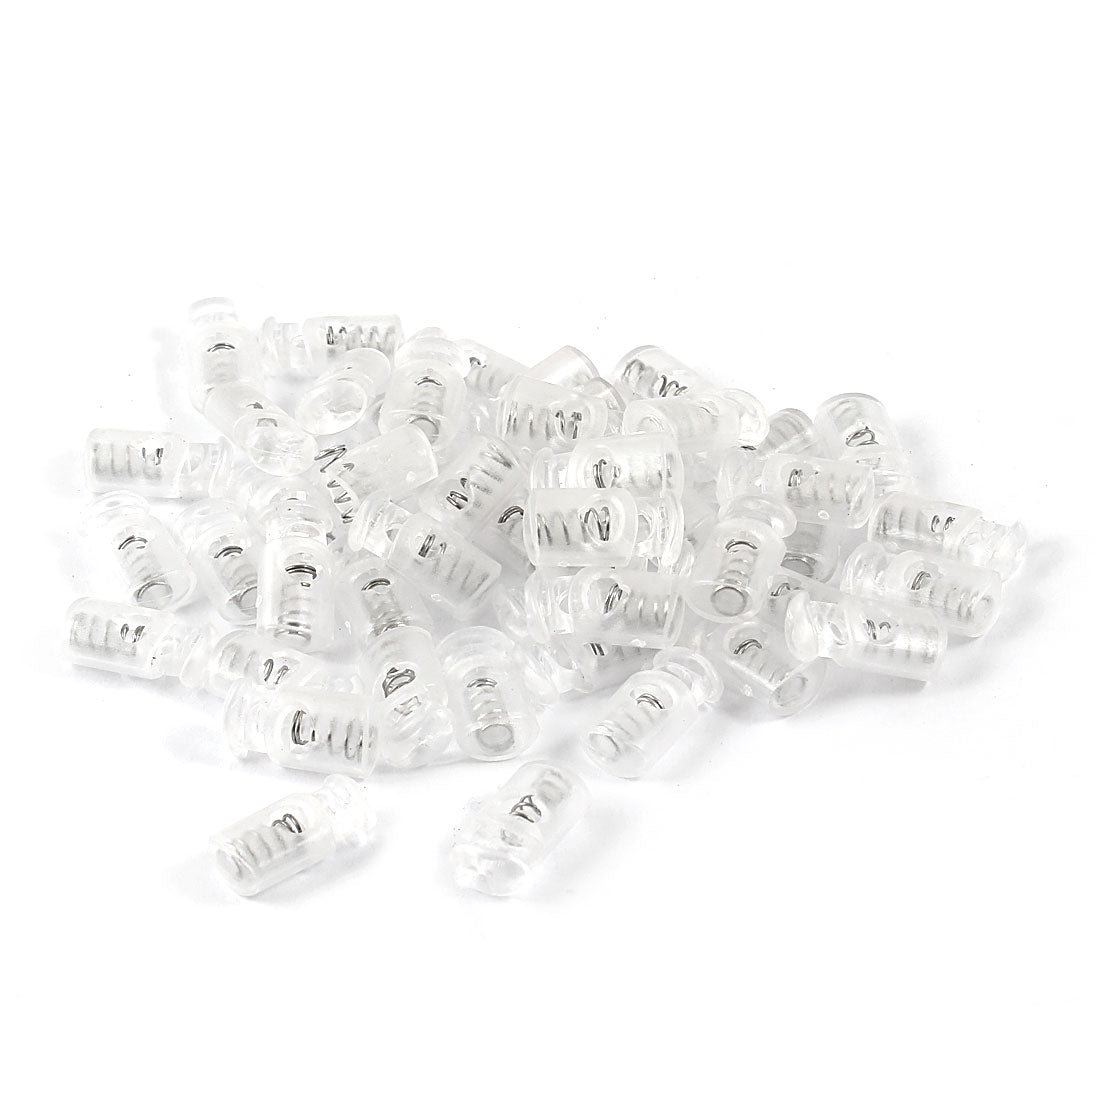 uxcell Uxcell Clear Plastic Single Hole 4mm Dia Cylindrical Shape Spring Loaded Clamps Clip Drawstring Rope Cord Locks Stopper Toggles 50pcs